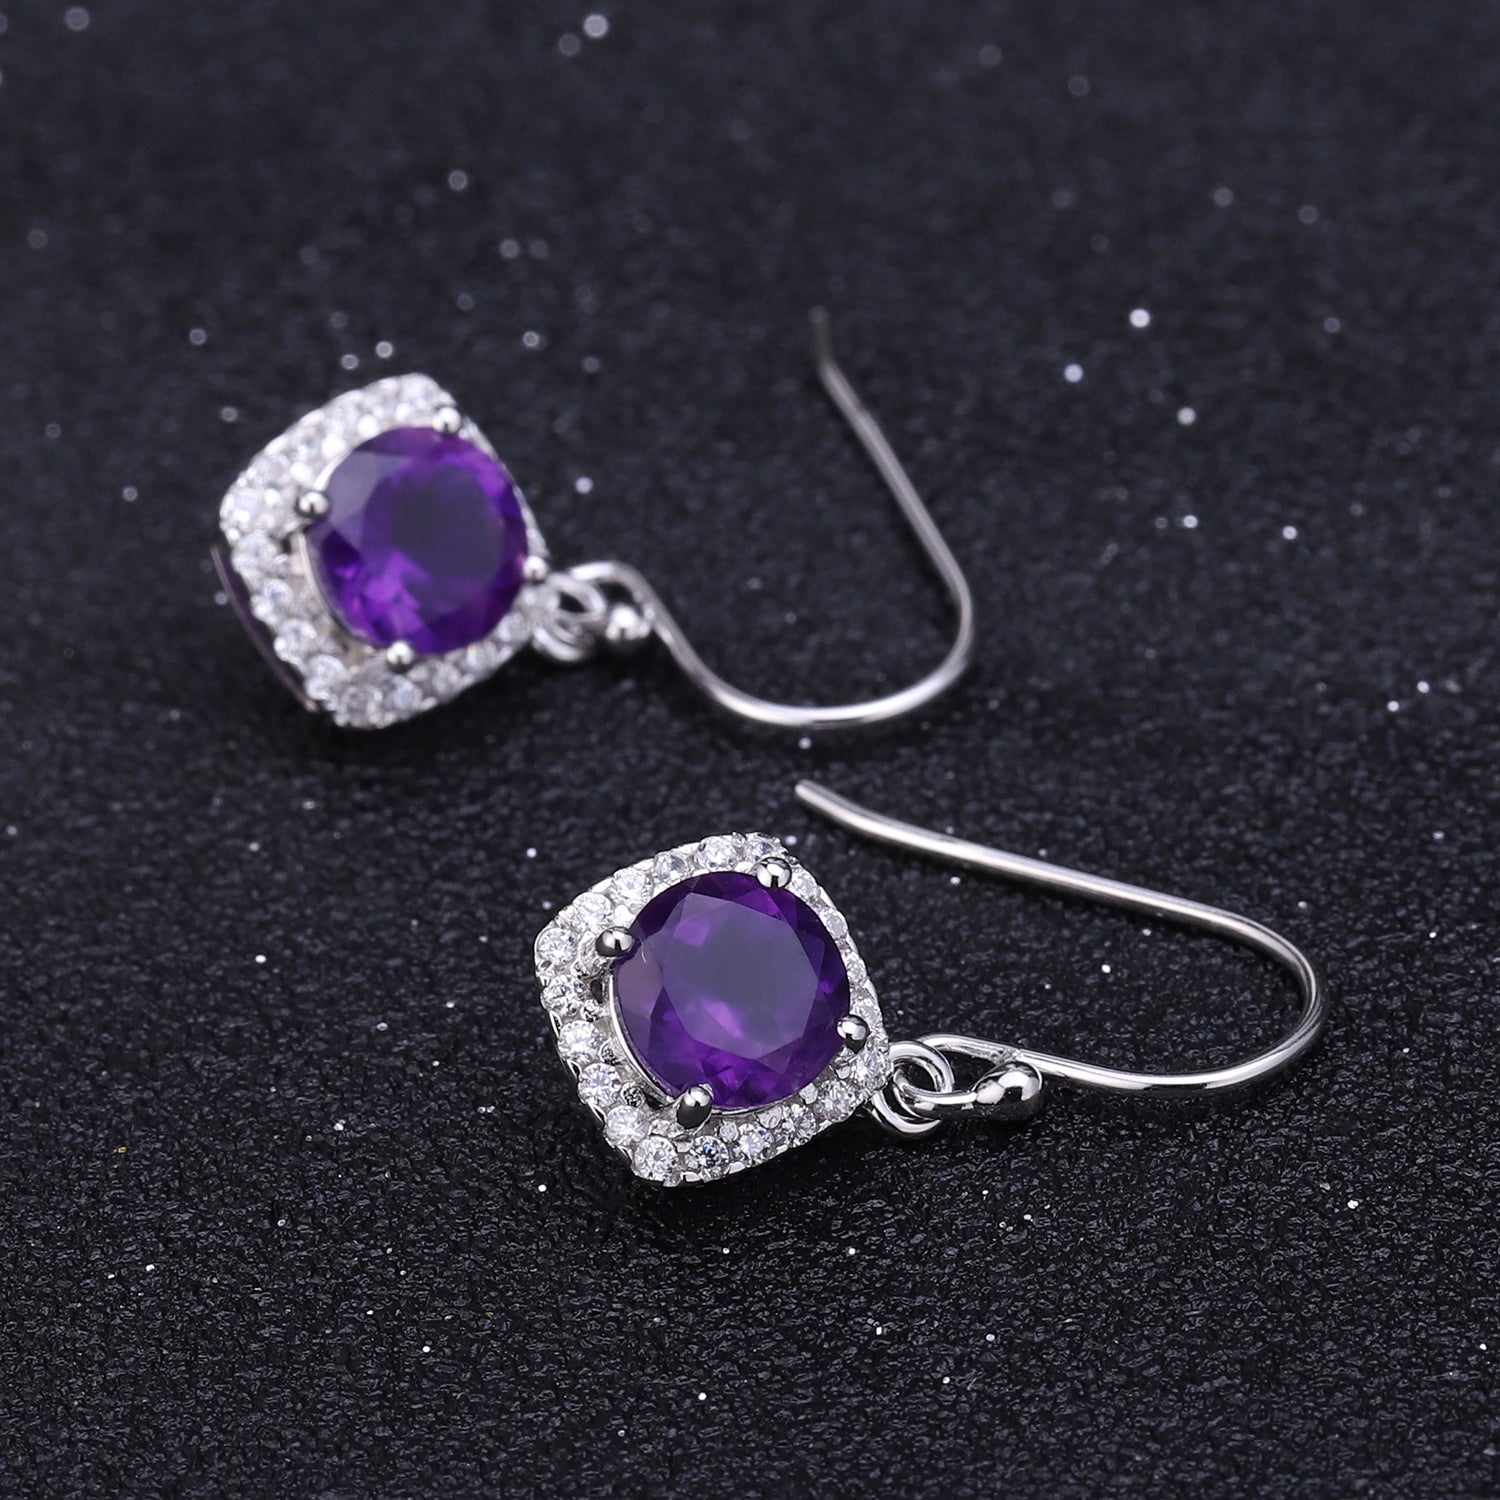 another angle of amethyst earrings on dark background